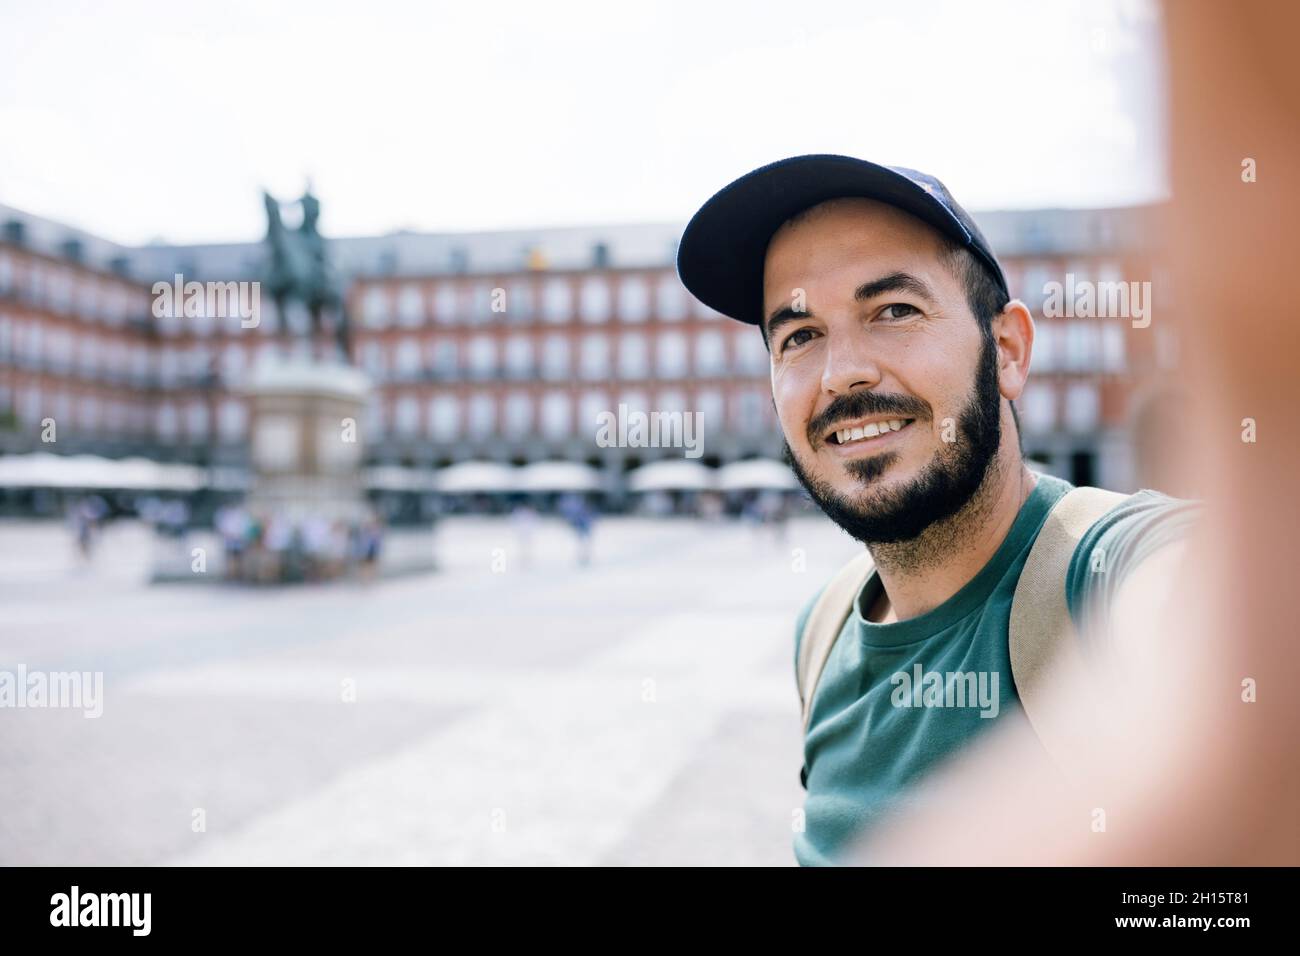 Happy man visiting Plaza Mayor in Madrid, Spain - Tourism and vacation concept Stock Photo